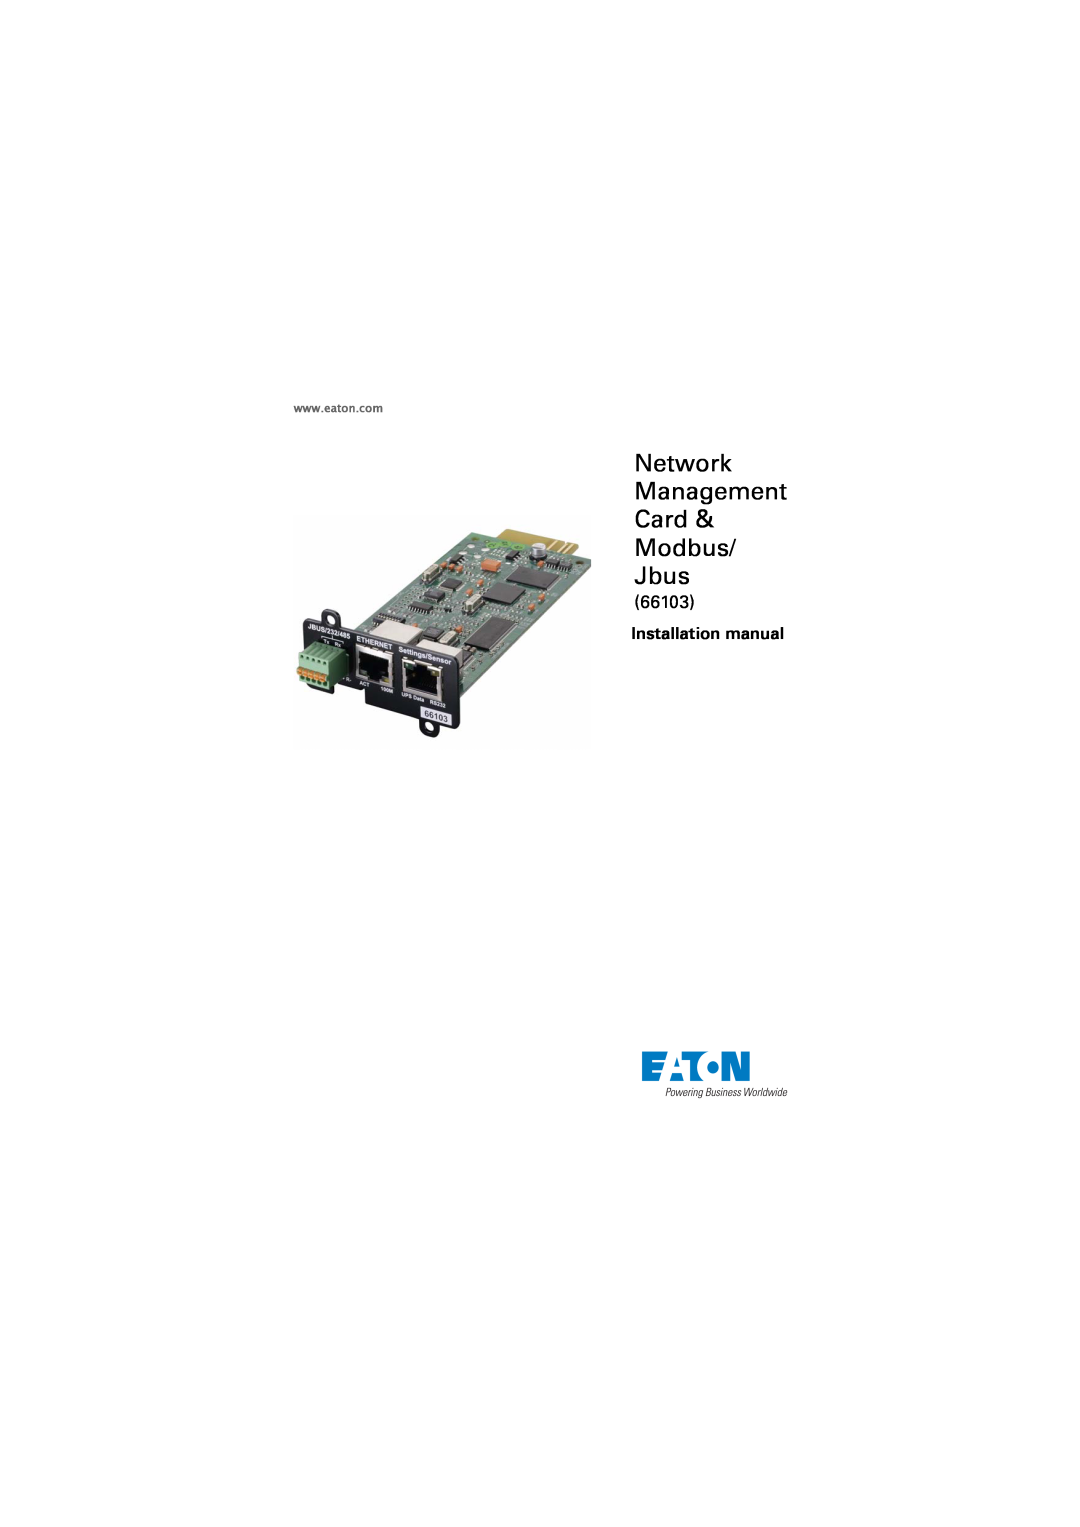 Eaton Electrical 66103 installation manual Network Management Card Modbus Jbus, Installation manual 